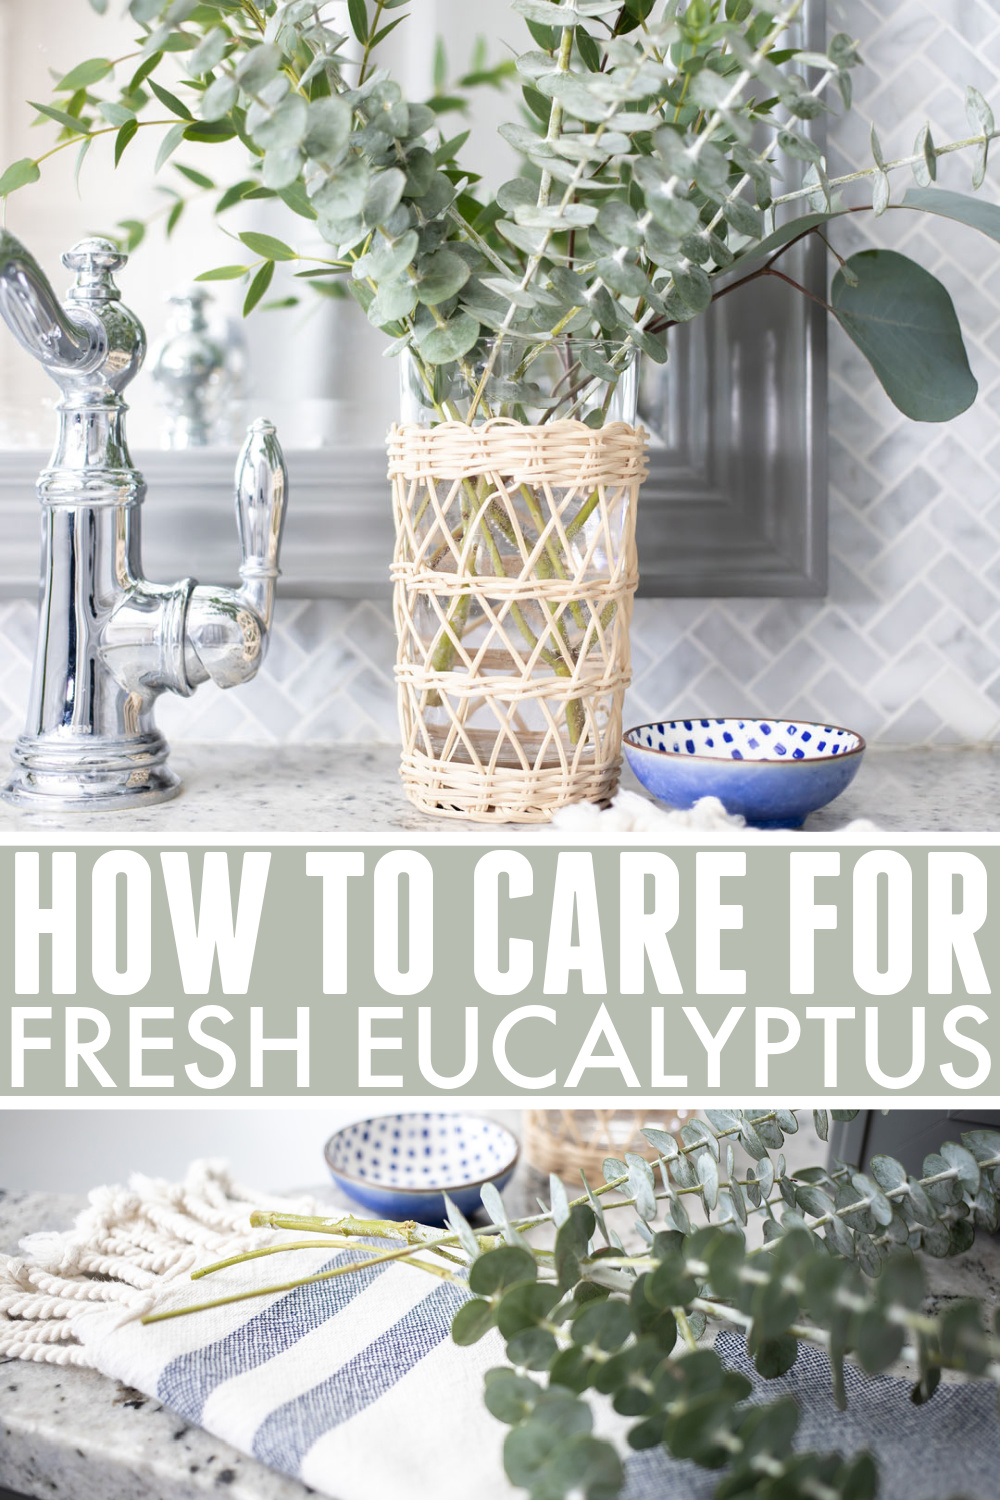 How to care for eucalyptus stems from the flower shop.